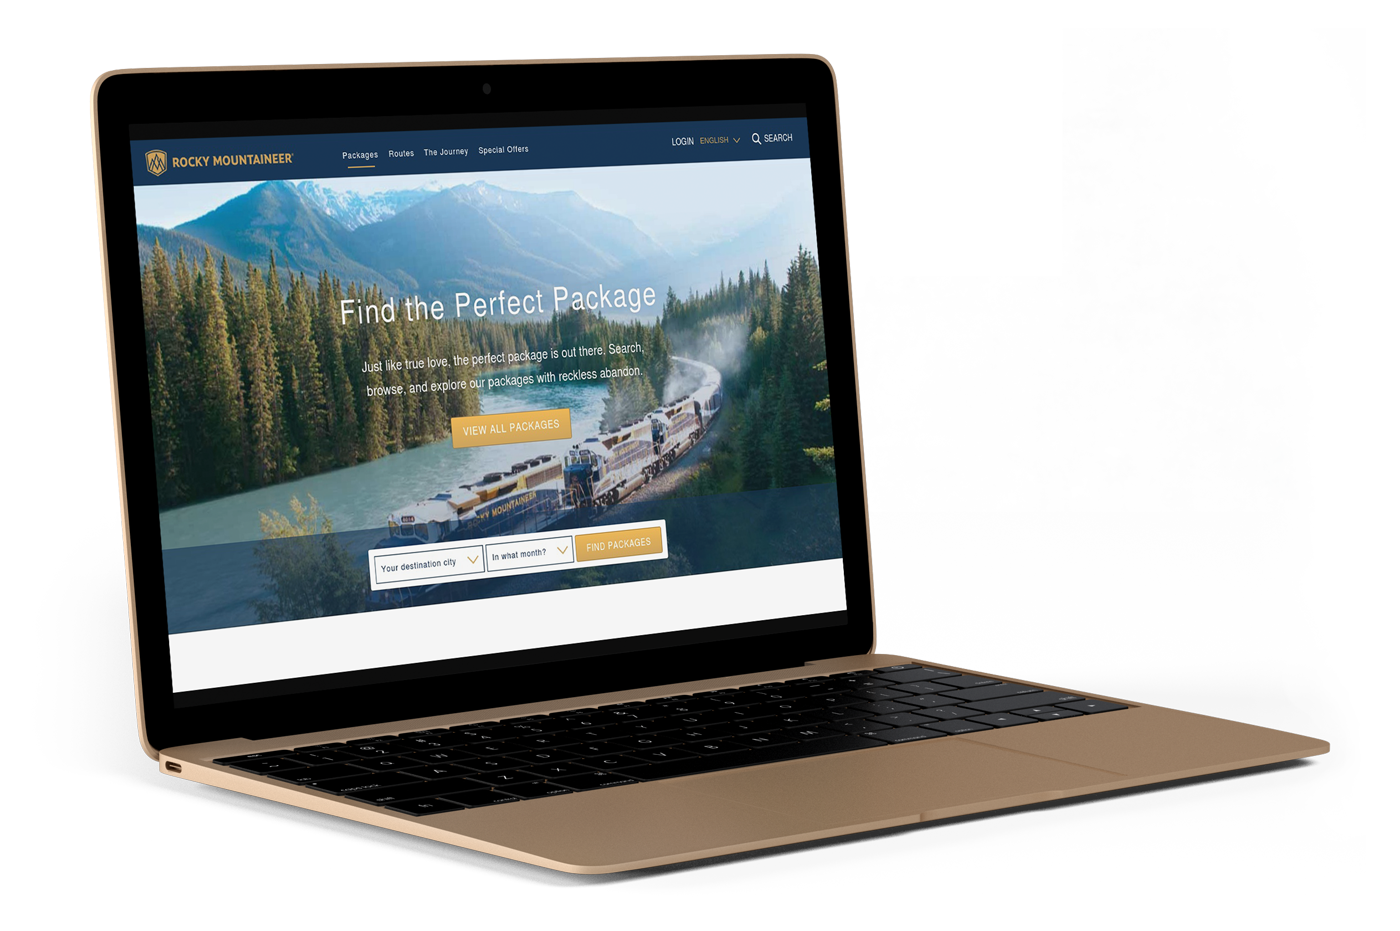 Rocky Mountaineer website homepage on a laptop.